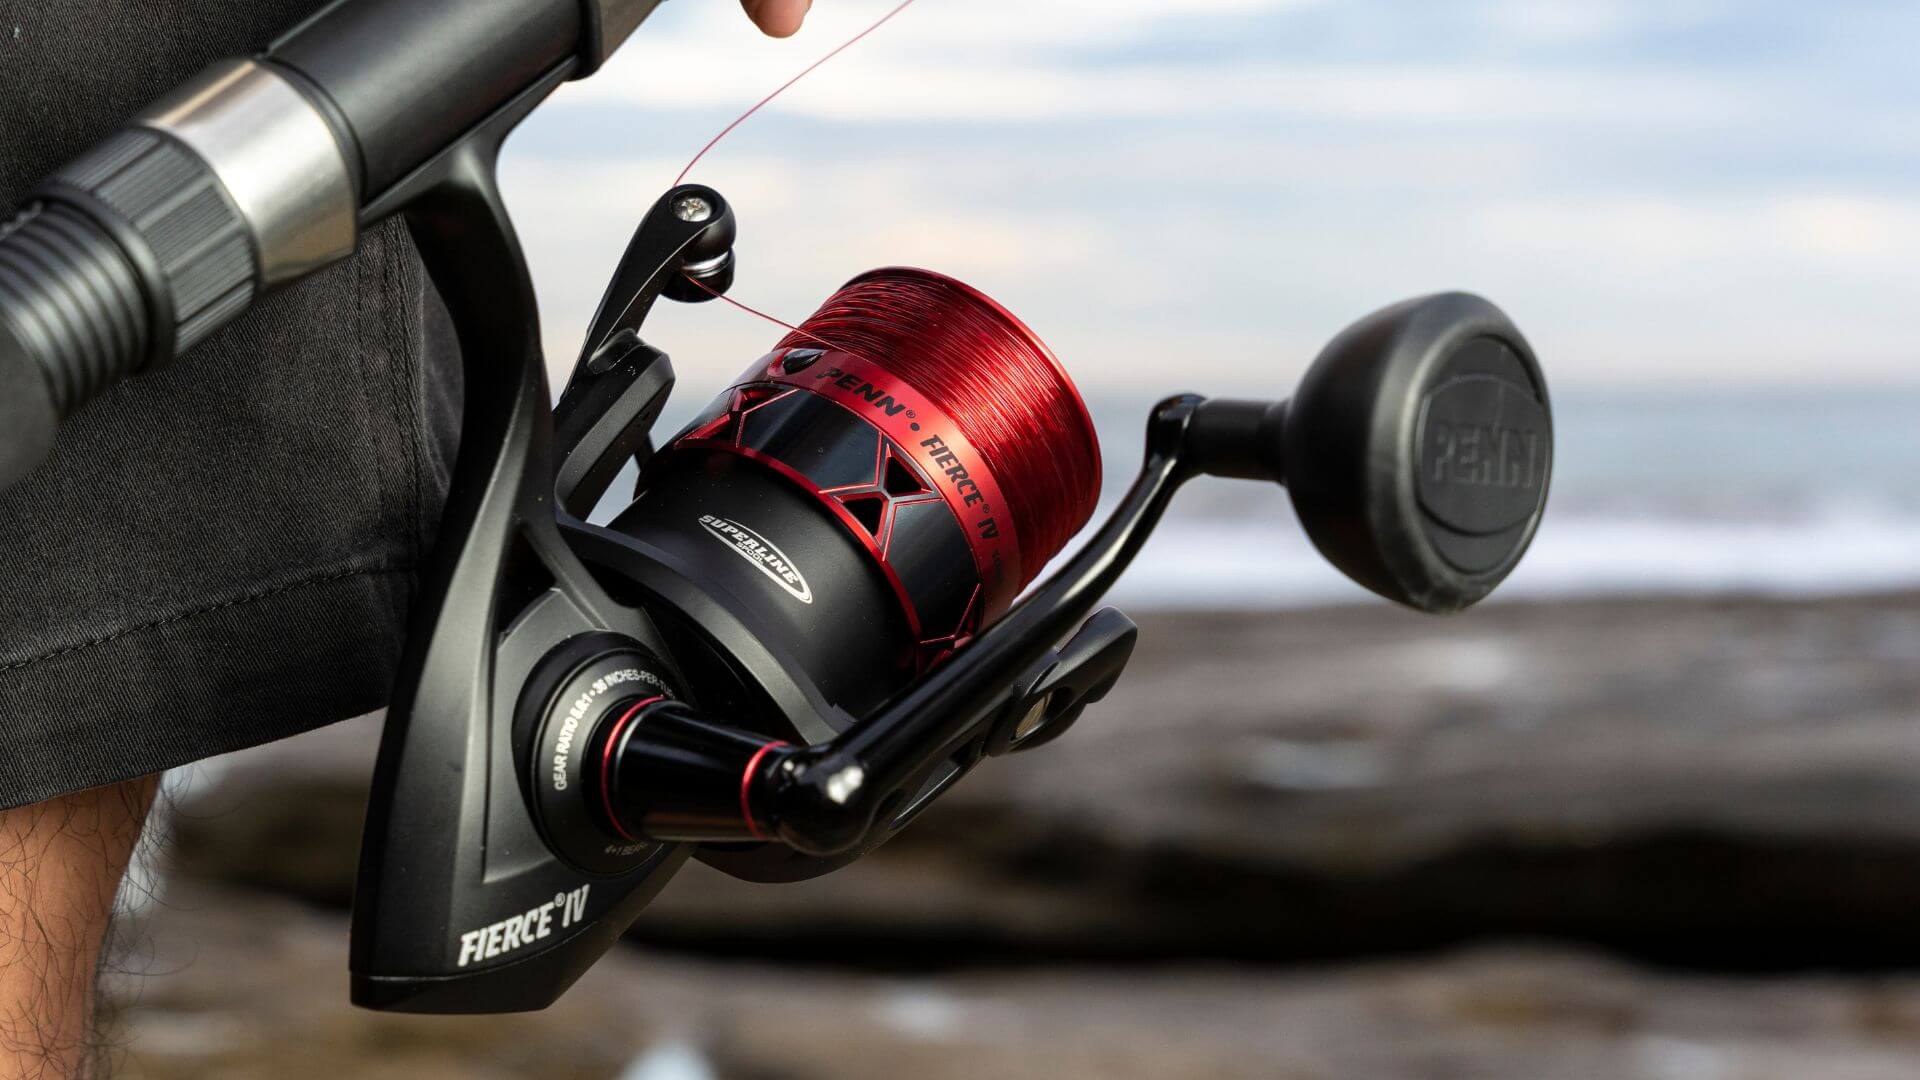 Learn About The Tech Behind The New PENN Fierce IV Spin Reel - PENN Fierce IV Spin Reel Review